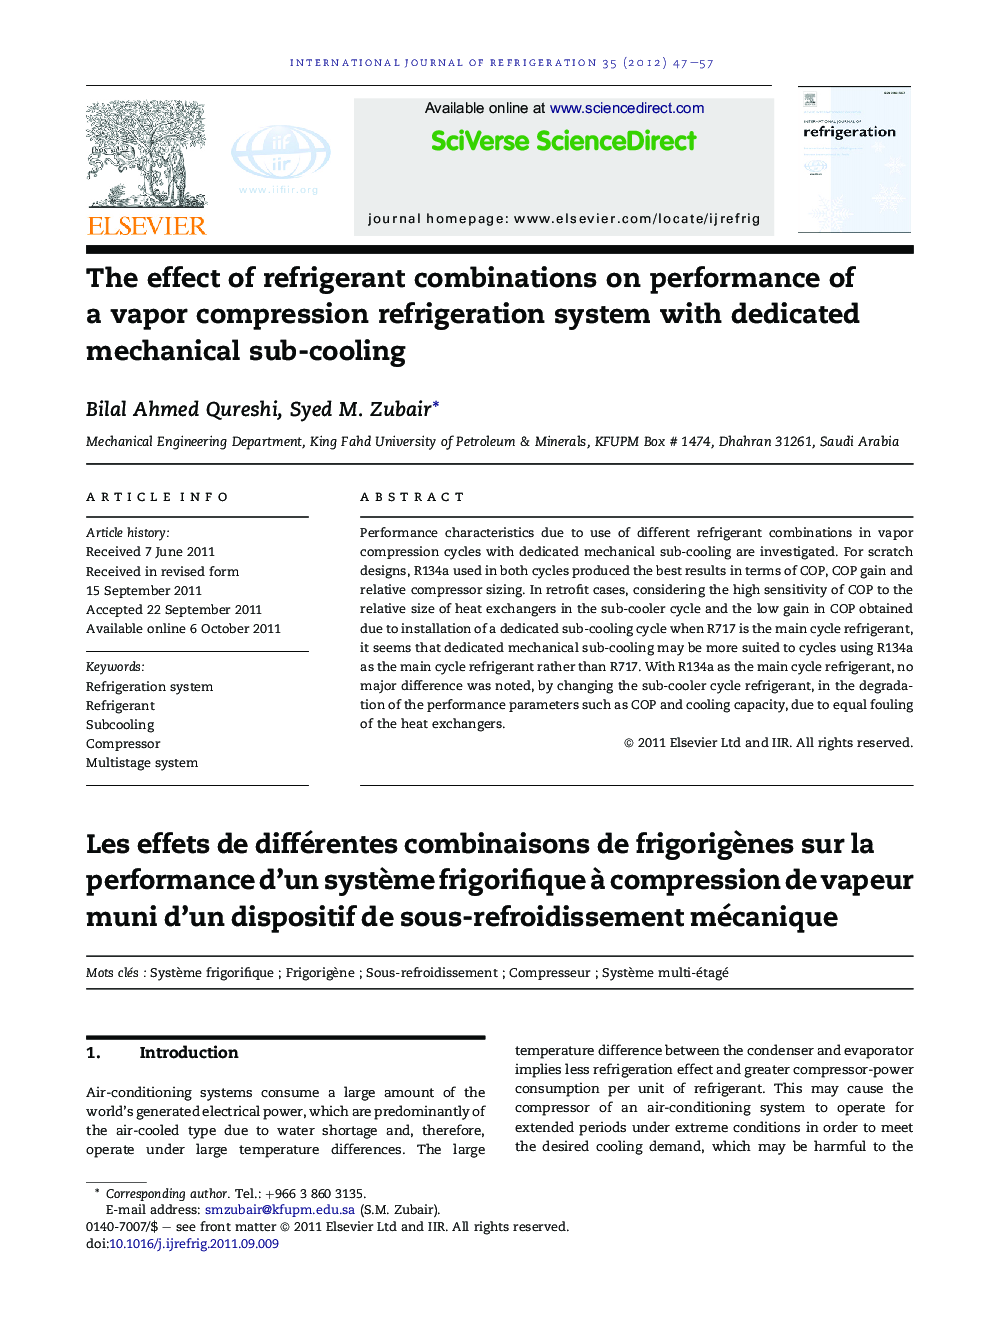 The effect of refrigerant combinations on performance of a vapor compression refrigeration system with dedicated mechanical sub-cooling